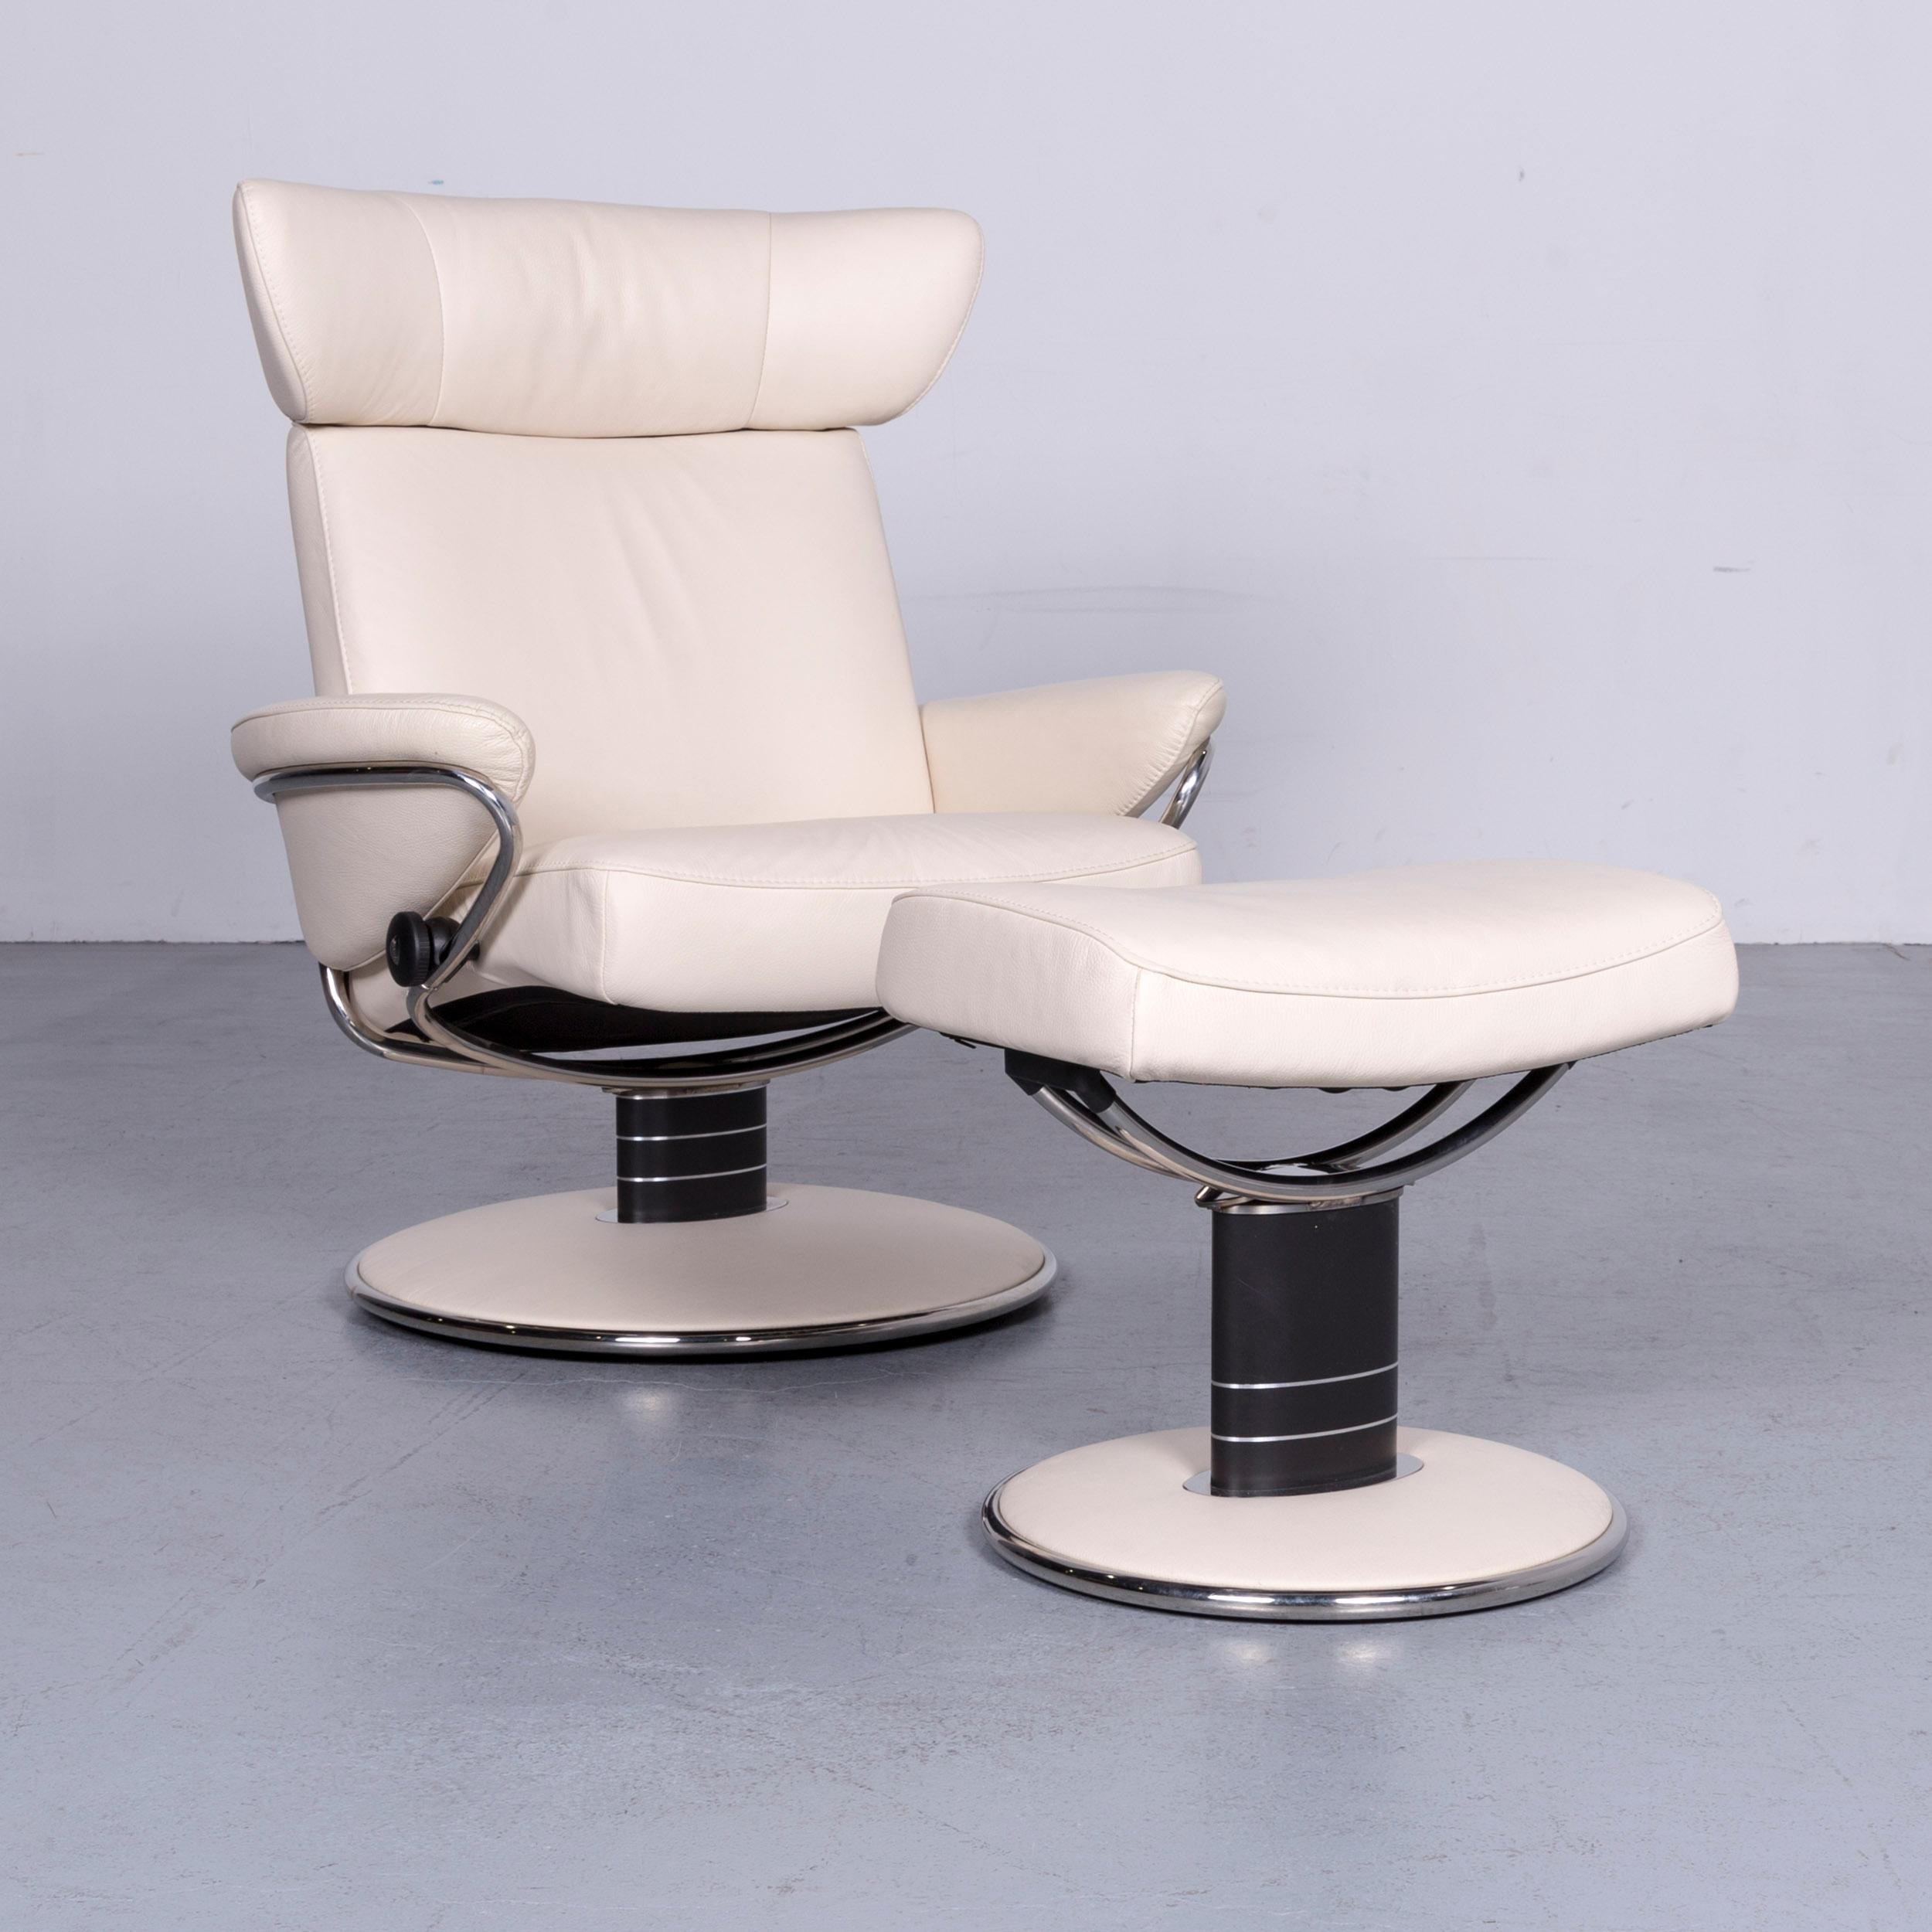 We bring to you an Ekornes Stressless jazz designer leather office chair crème with stool.